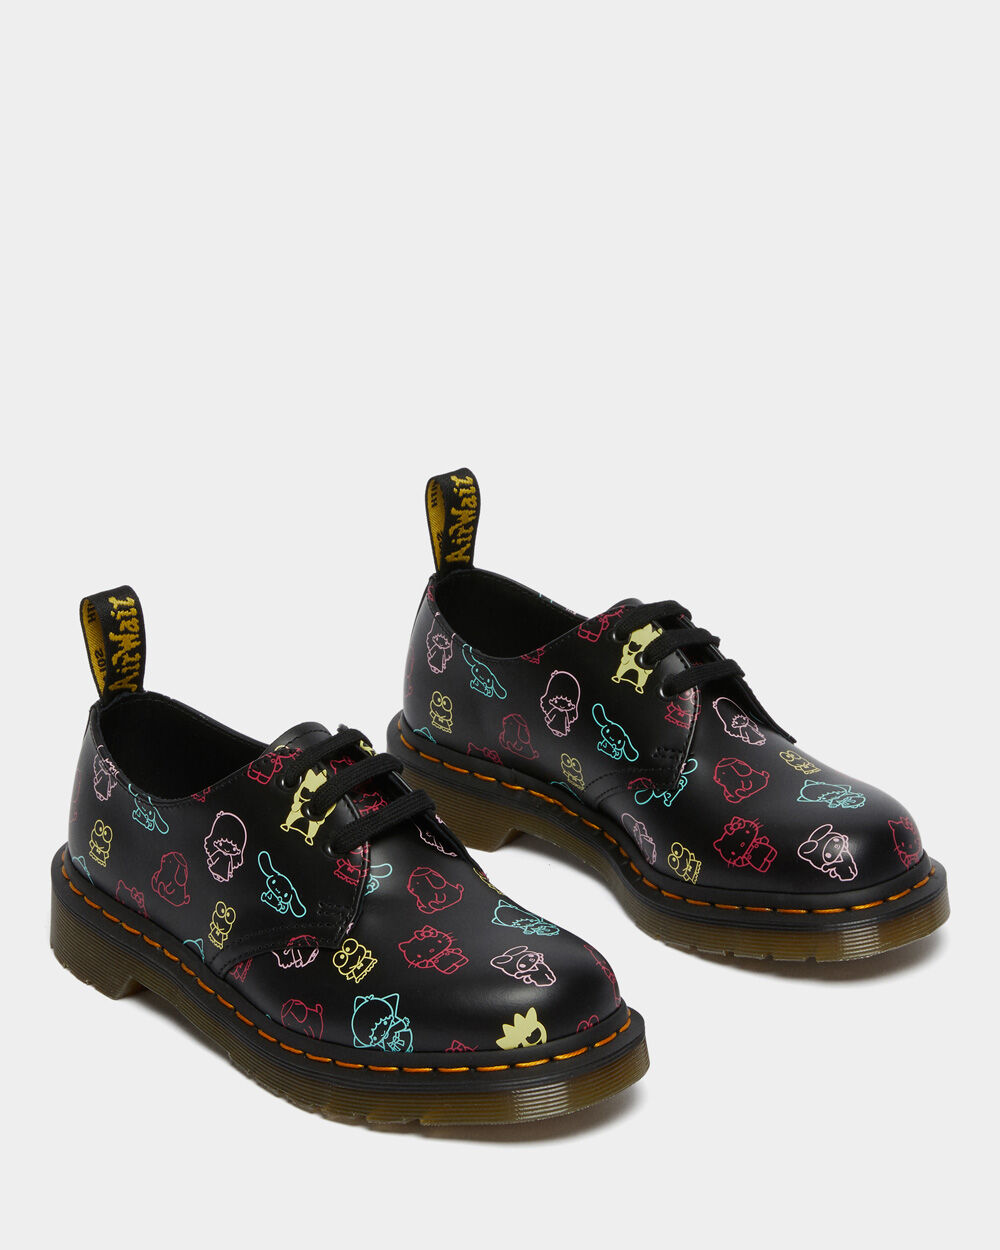 DR. MARTENS x Hello Kitty & Friends 1461 Smooth Leather Womens Oxford ...